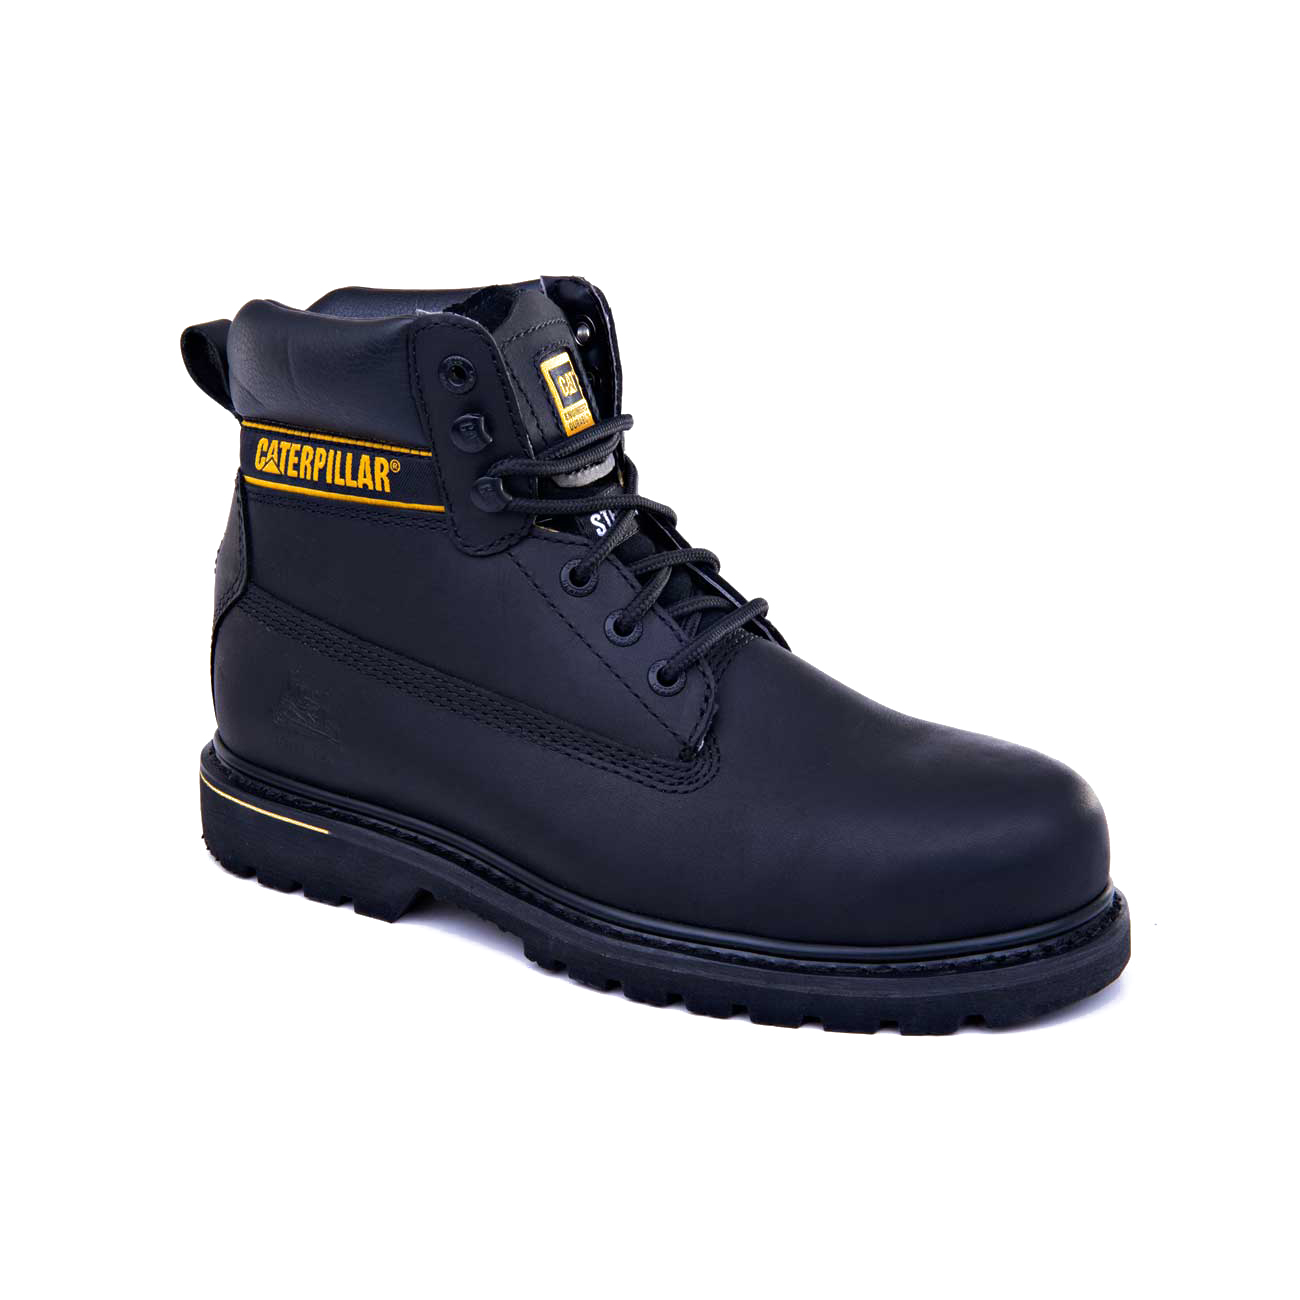 CAT FOOTWEAR - HOLOTON ST - SAFETY BOOT - BLACK